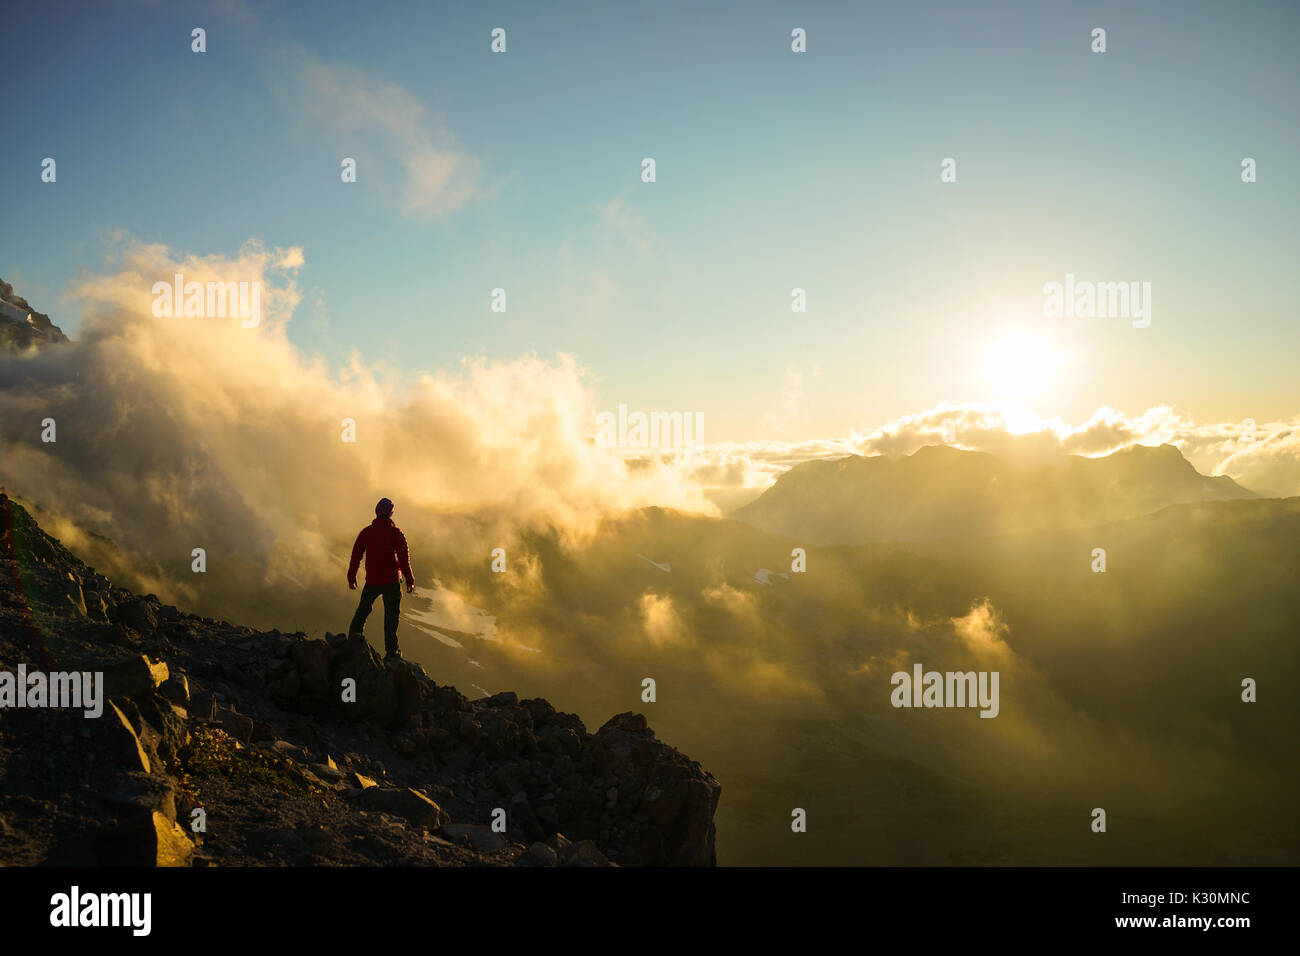 A hiker is standing on the mountain with clouds during sunset/sunrise at Mount Rainier National Park, Washington. Stock Photo